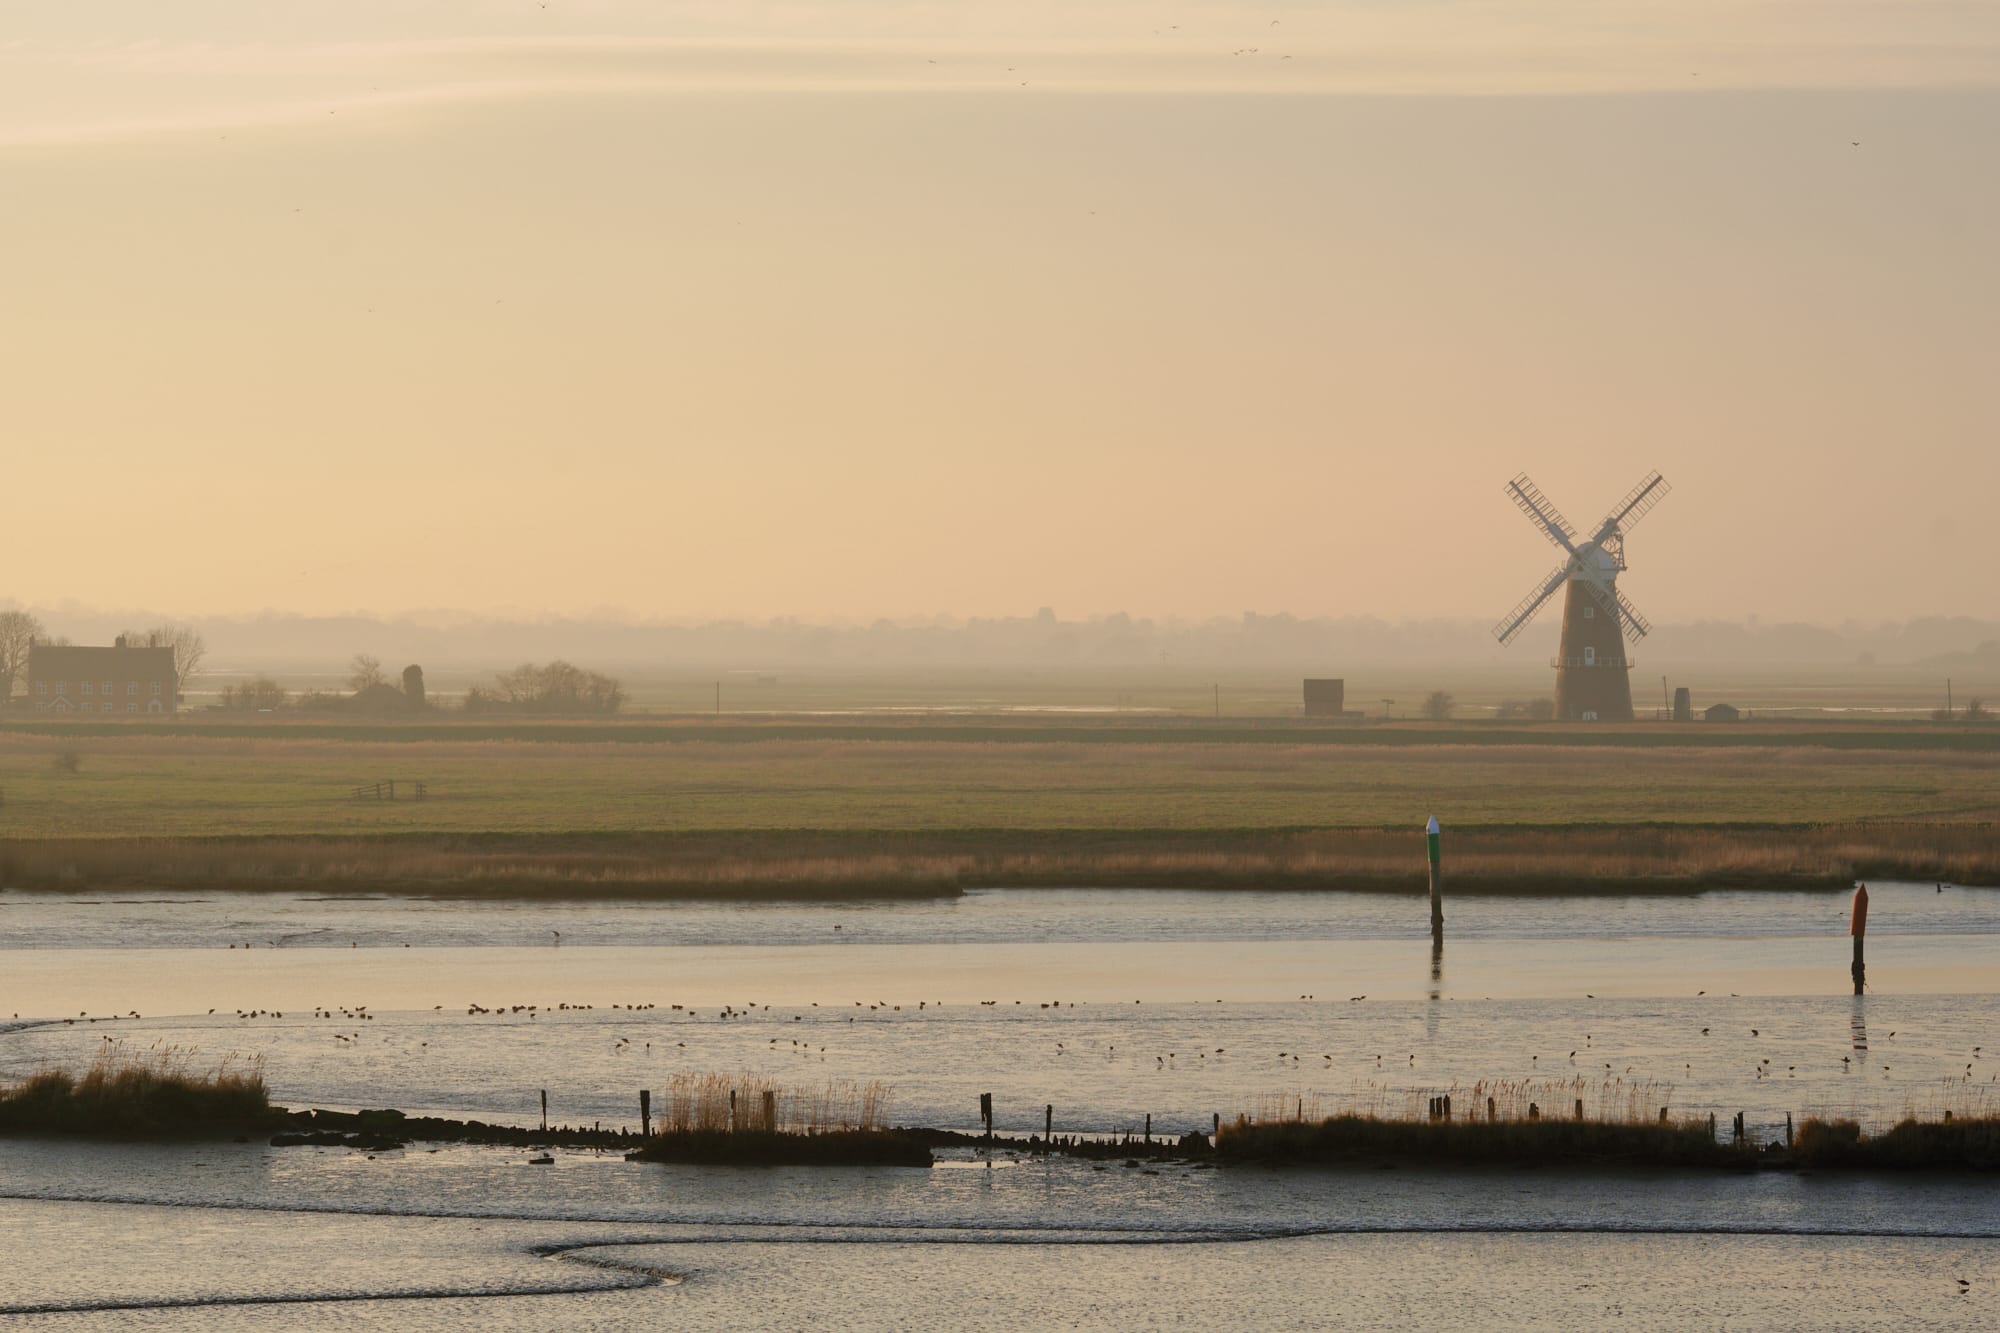 a windmill in the distance to the west